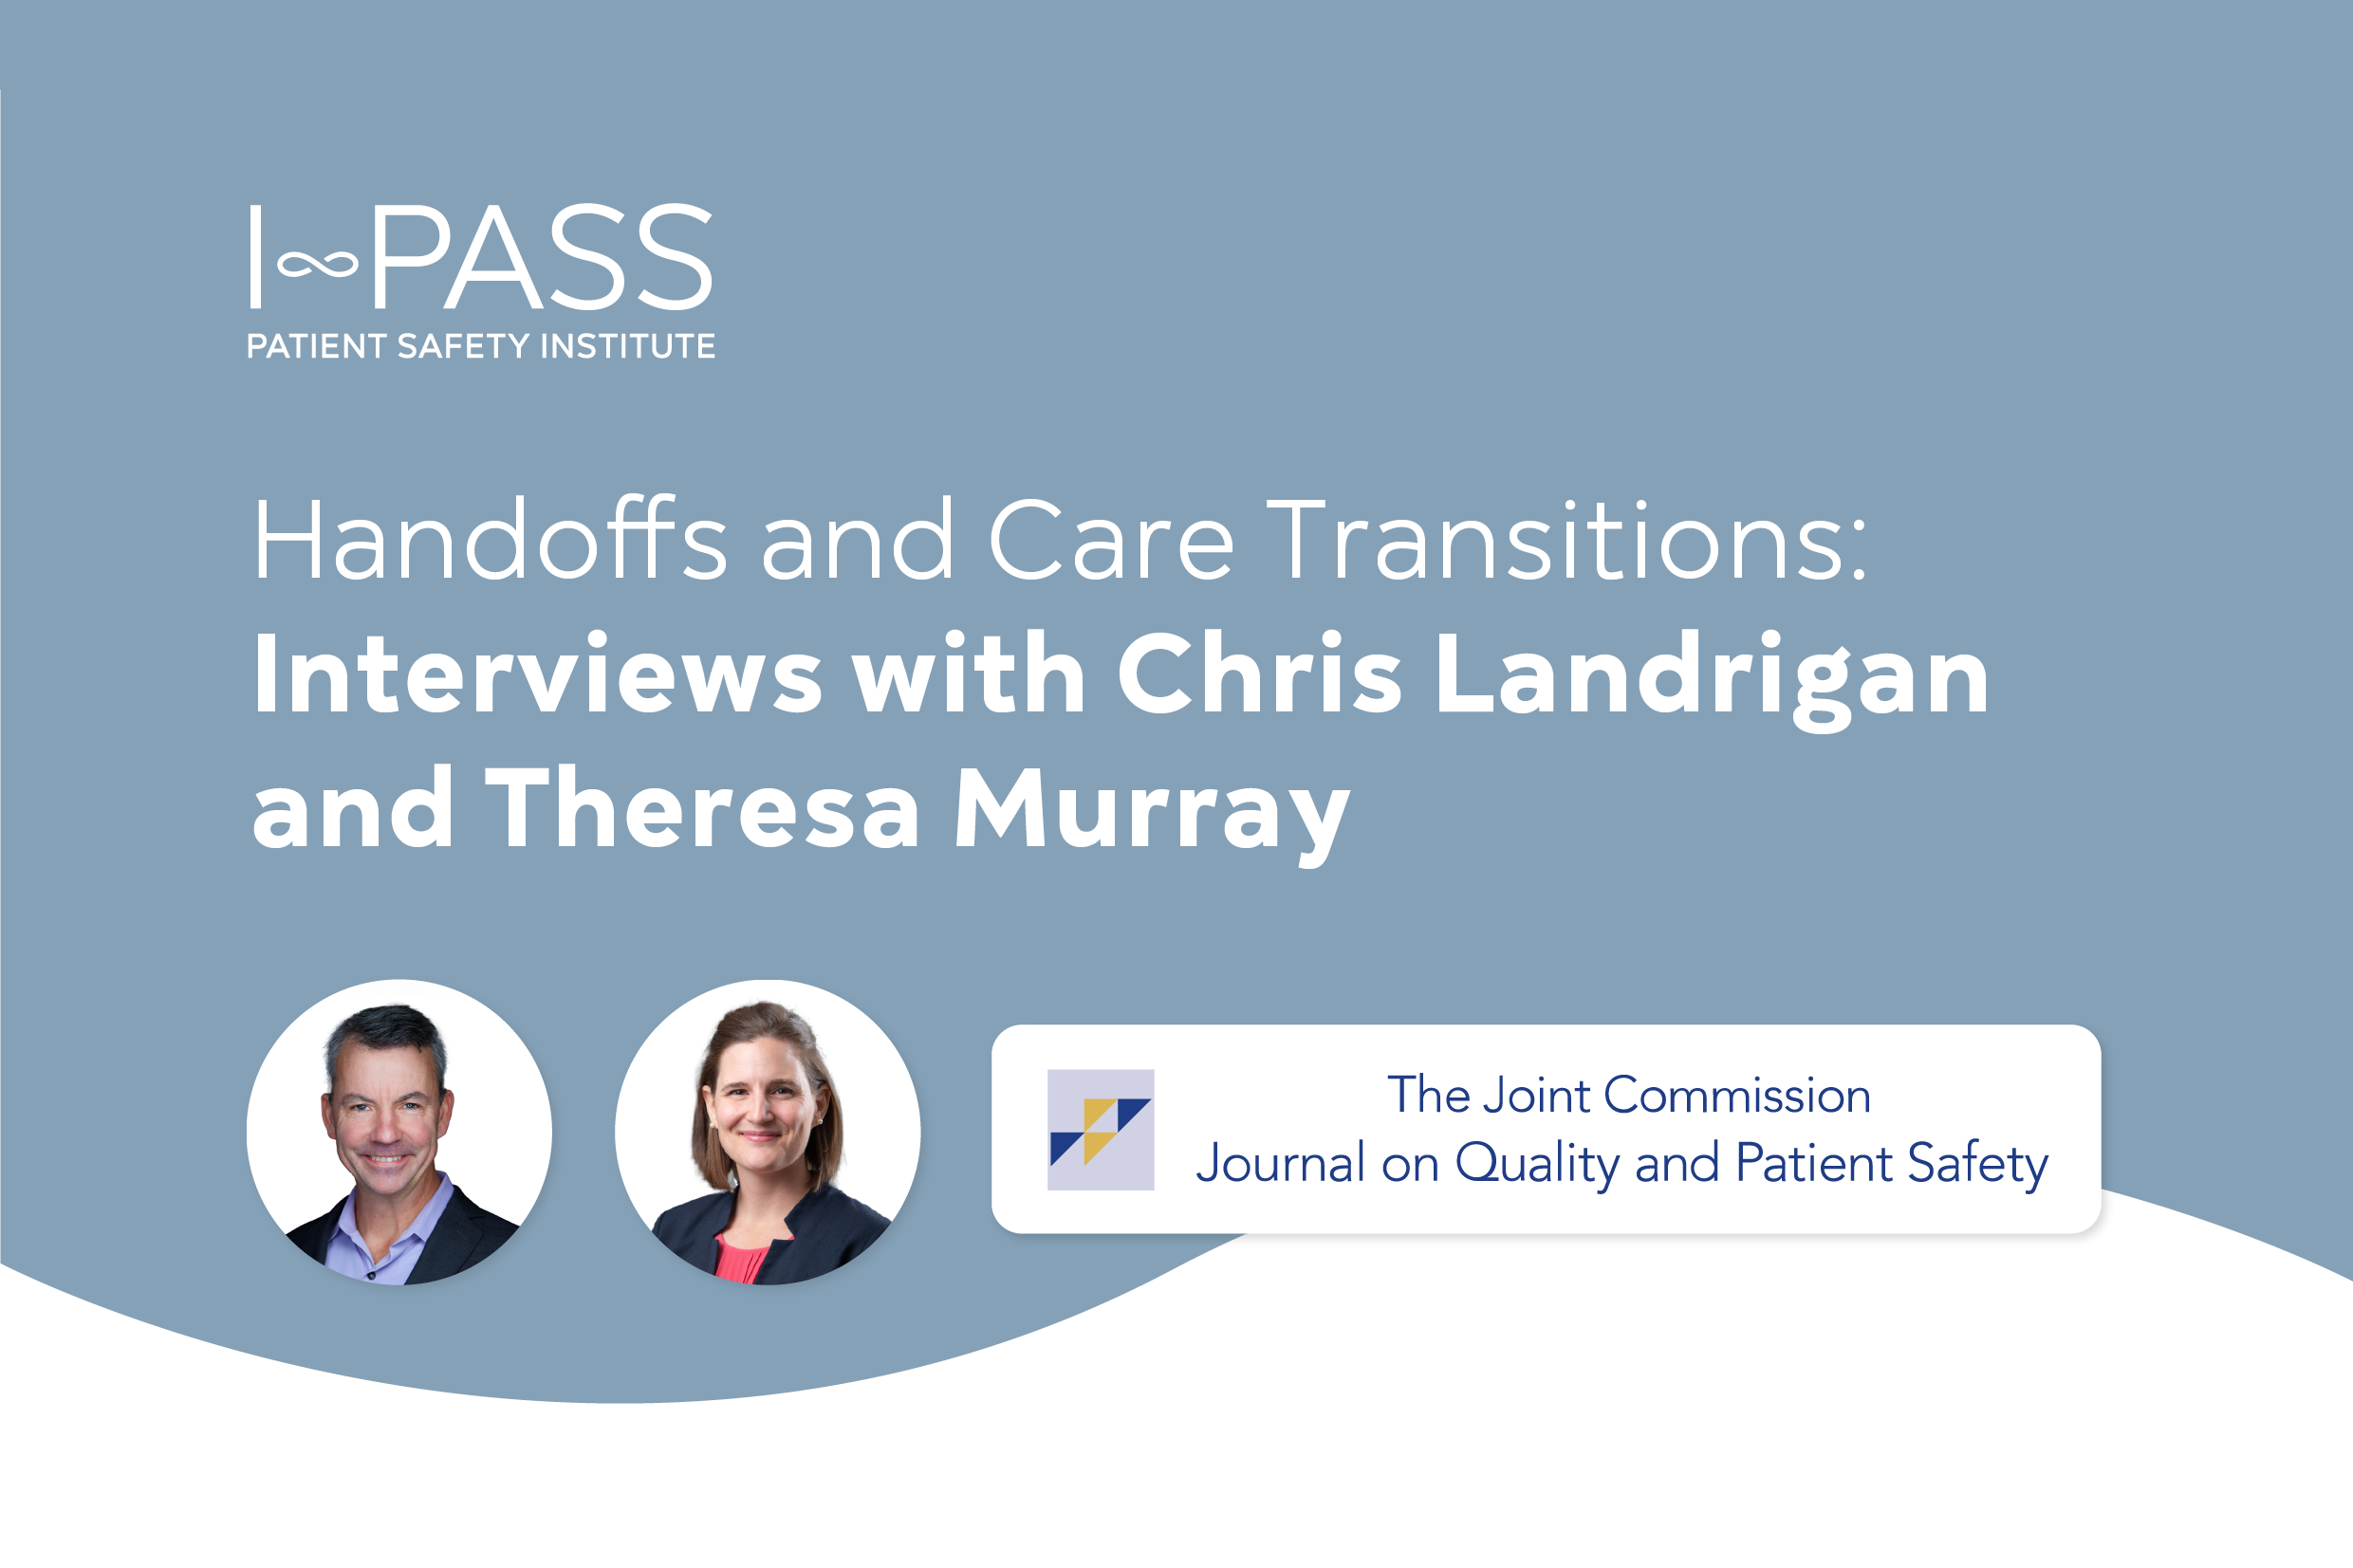 Handoffs and Care Transitions: Interviews with Chris Landrigan and Theresa Murray